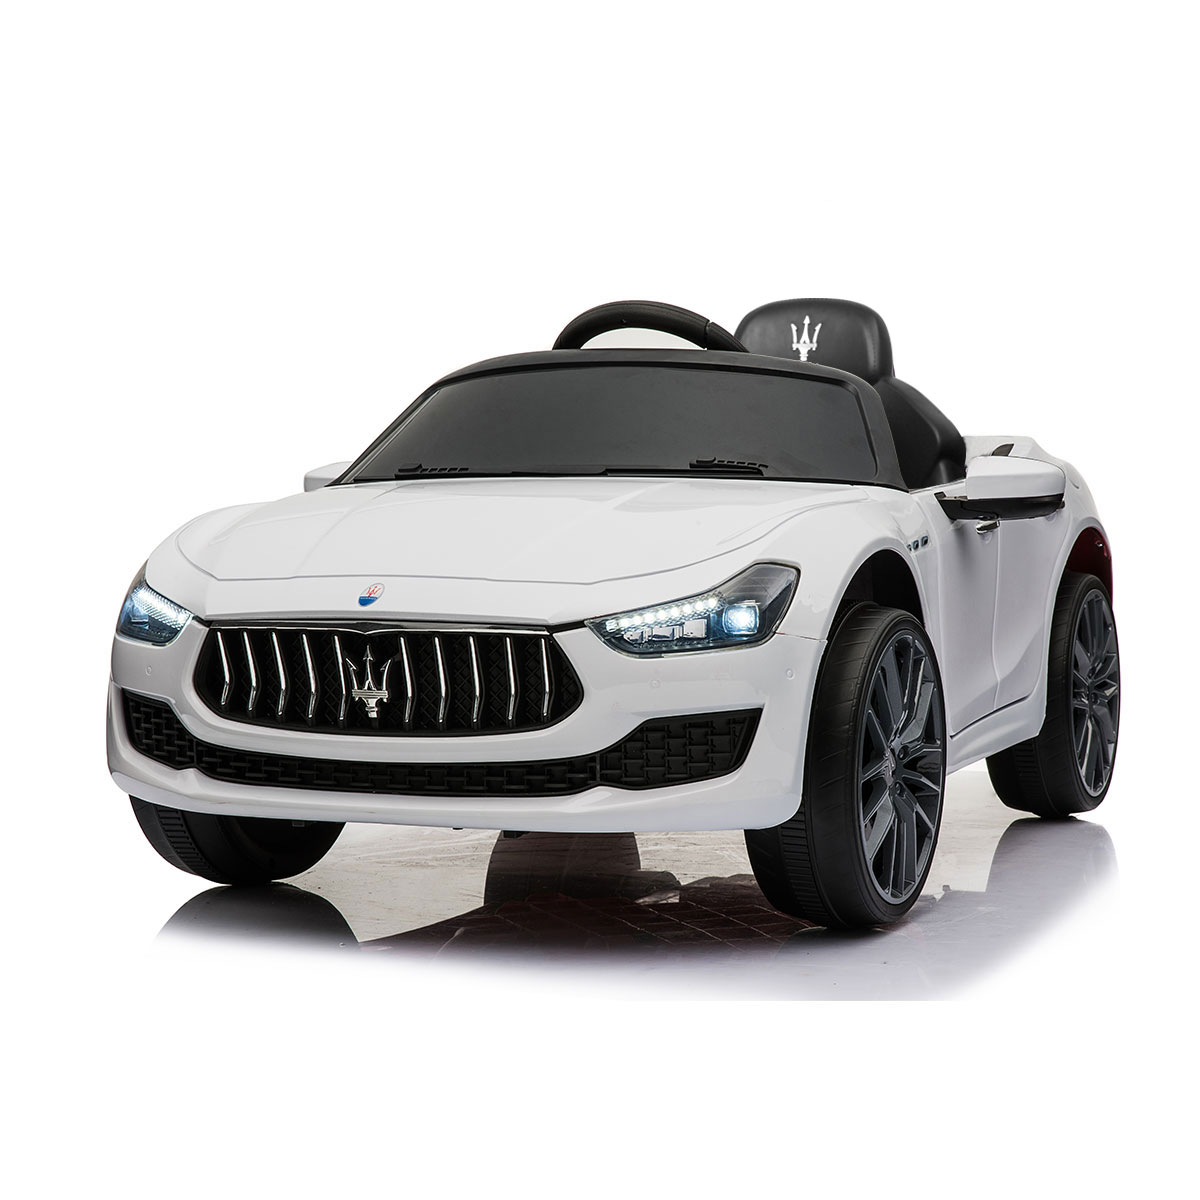 Maserati-Licensed 12V Kids Ride On Car, Electric Vehicle with Remote Control, MP3, USB, Music, Horn, LED Lights, Openable Doors, White-CASAINC